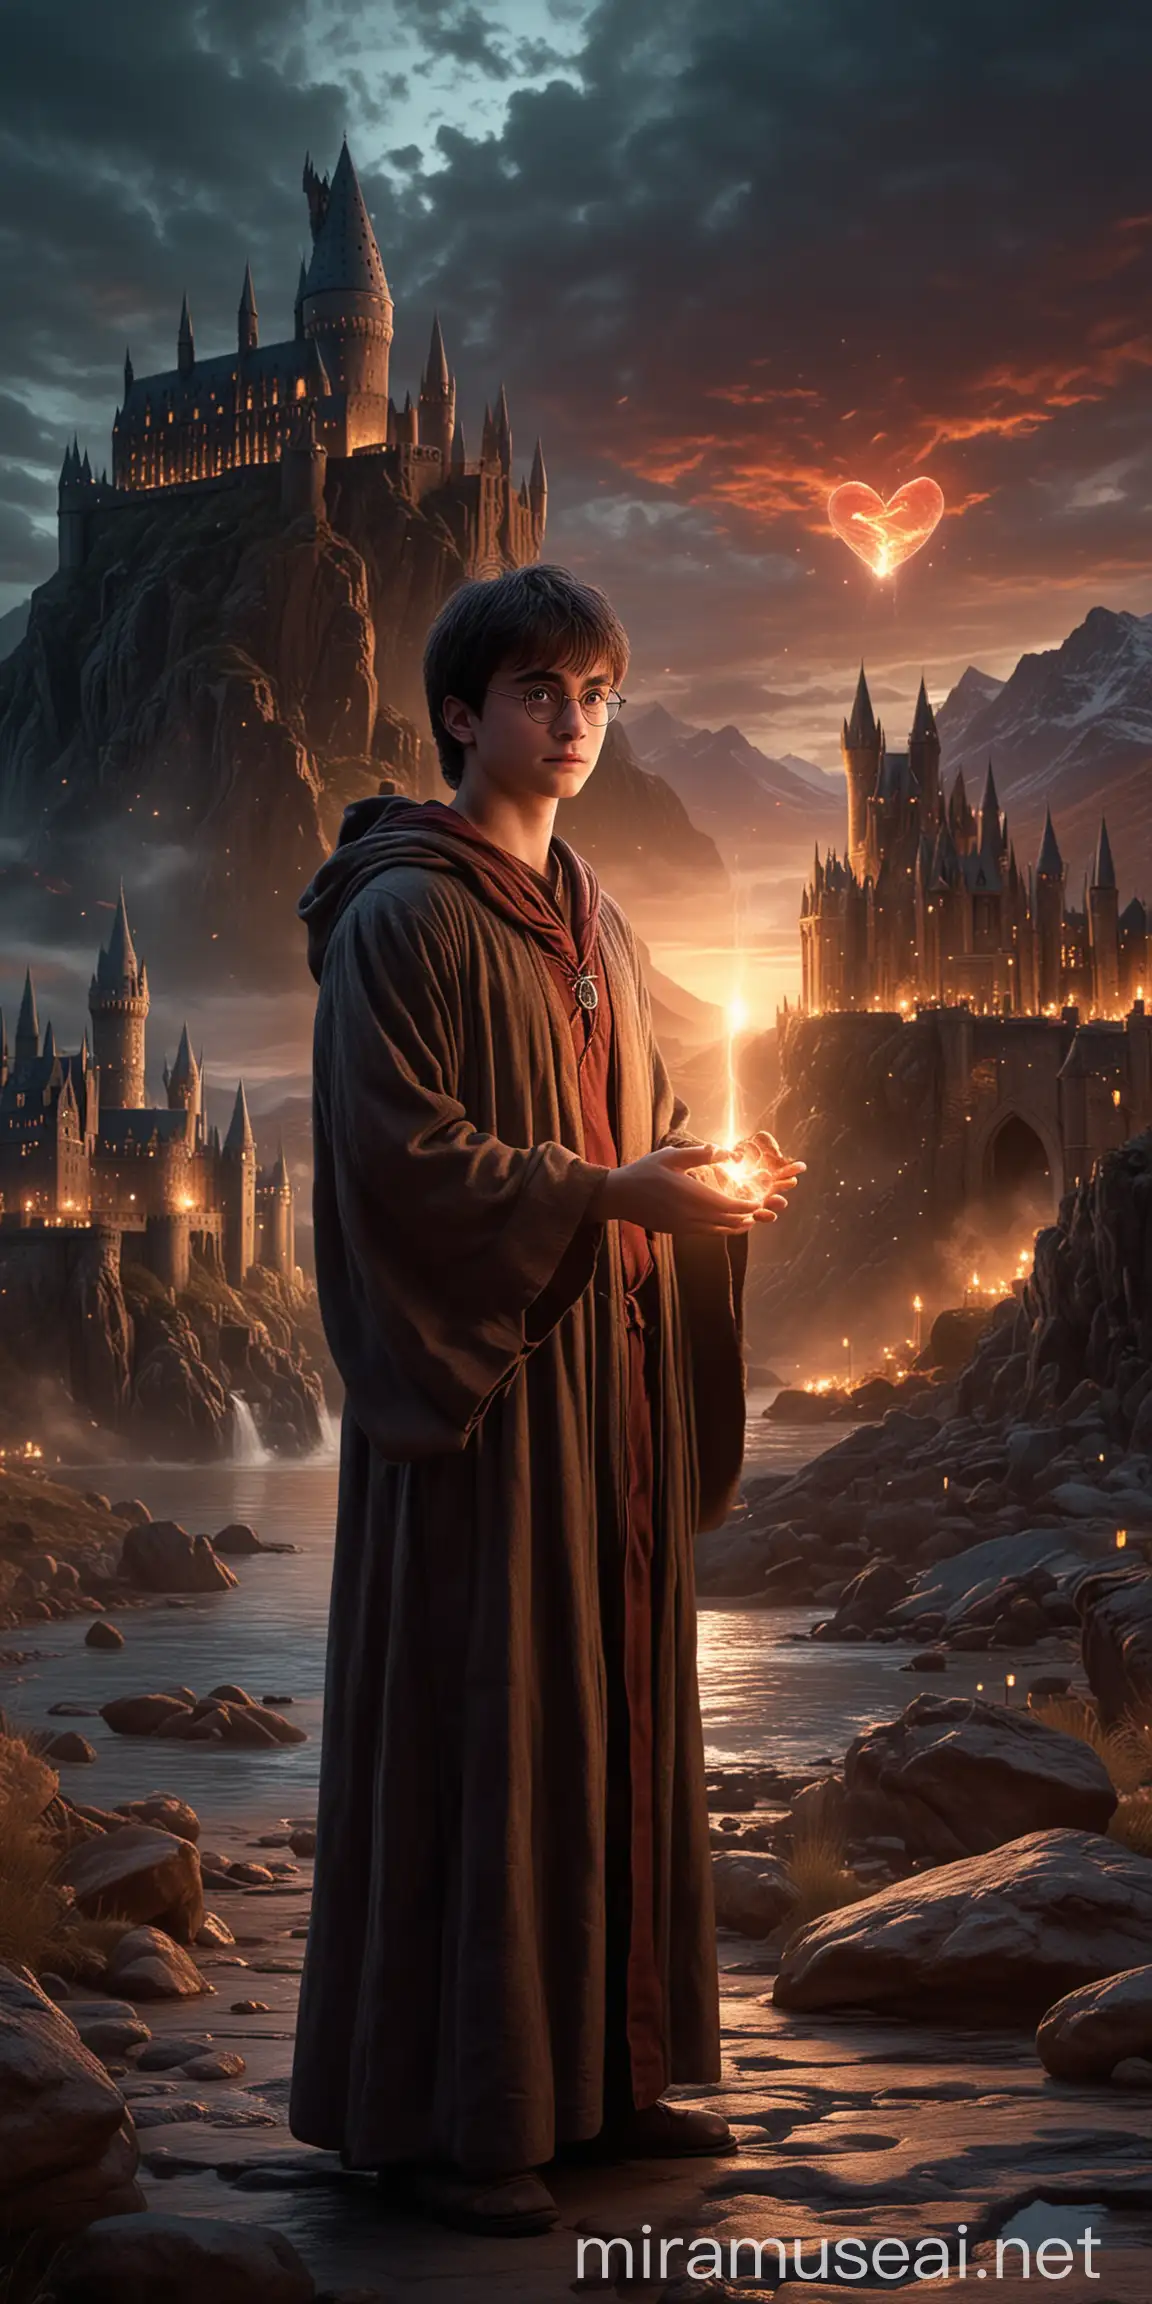 The Harry Potter character stands in a robe from Game of Thrones and holds a glowing heart in one hand. The background of the image is a mythical kingdom from “Game of Thrones” with elements of the House of the Dragon. This setting enhances the mystical atmosphere, combining ancient architecture and dramatic landscapes., Rocky mountains, dragon falls and ancient ruins are shrouded in a magical twilight glow.